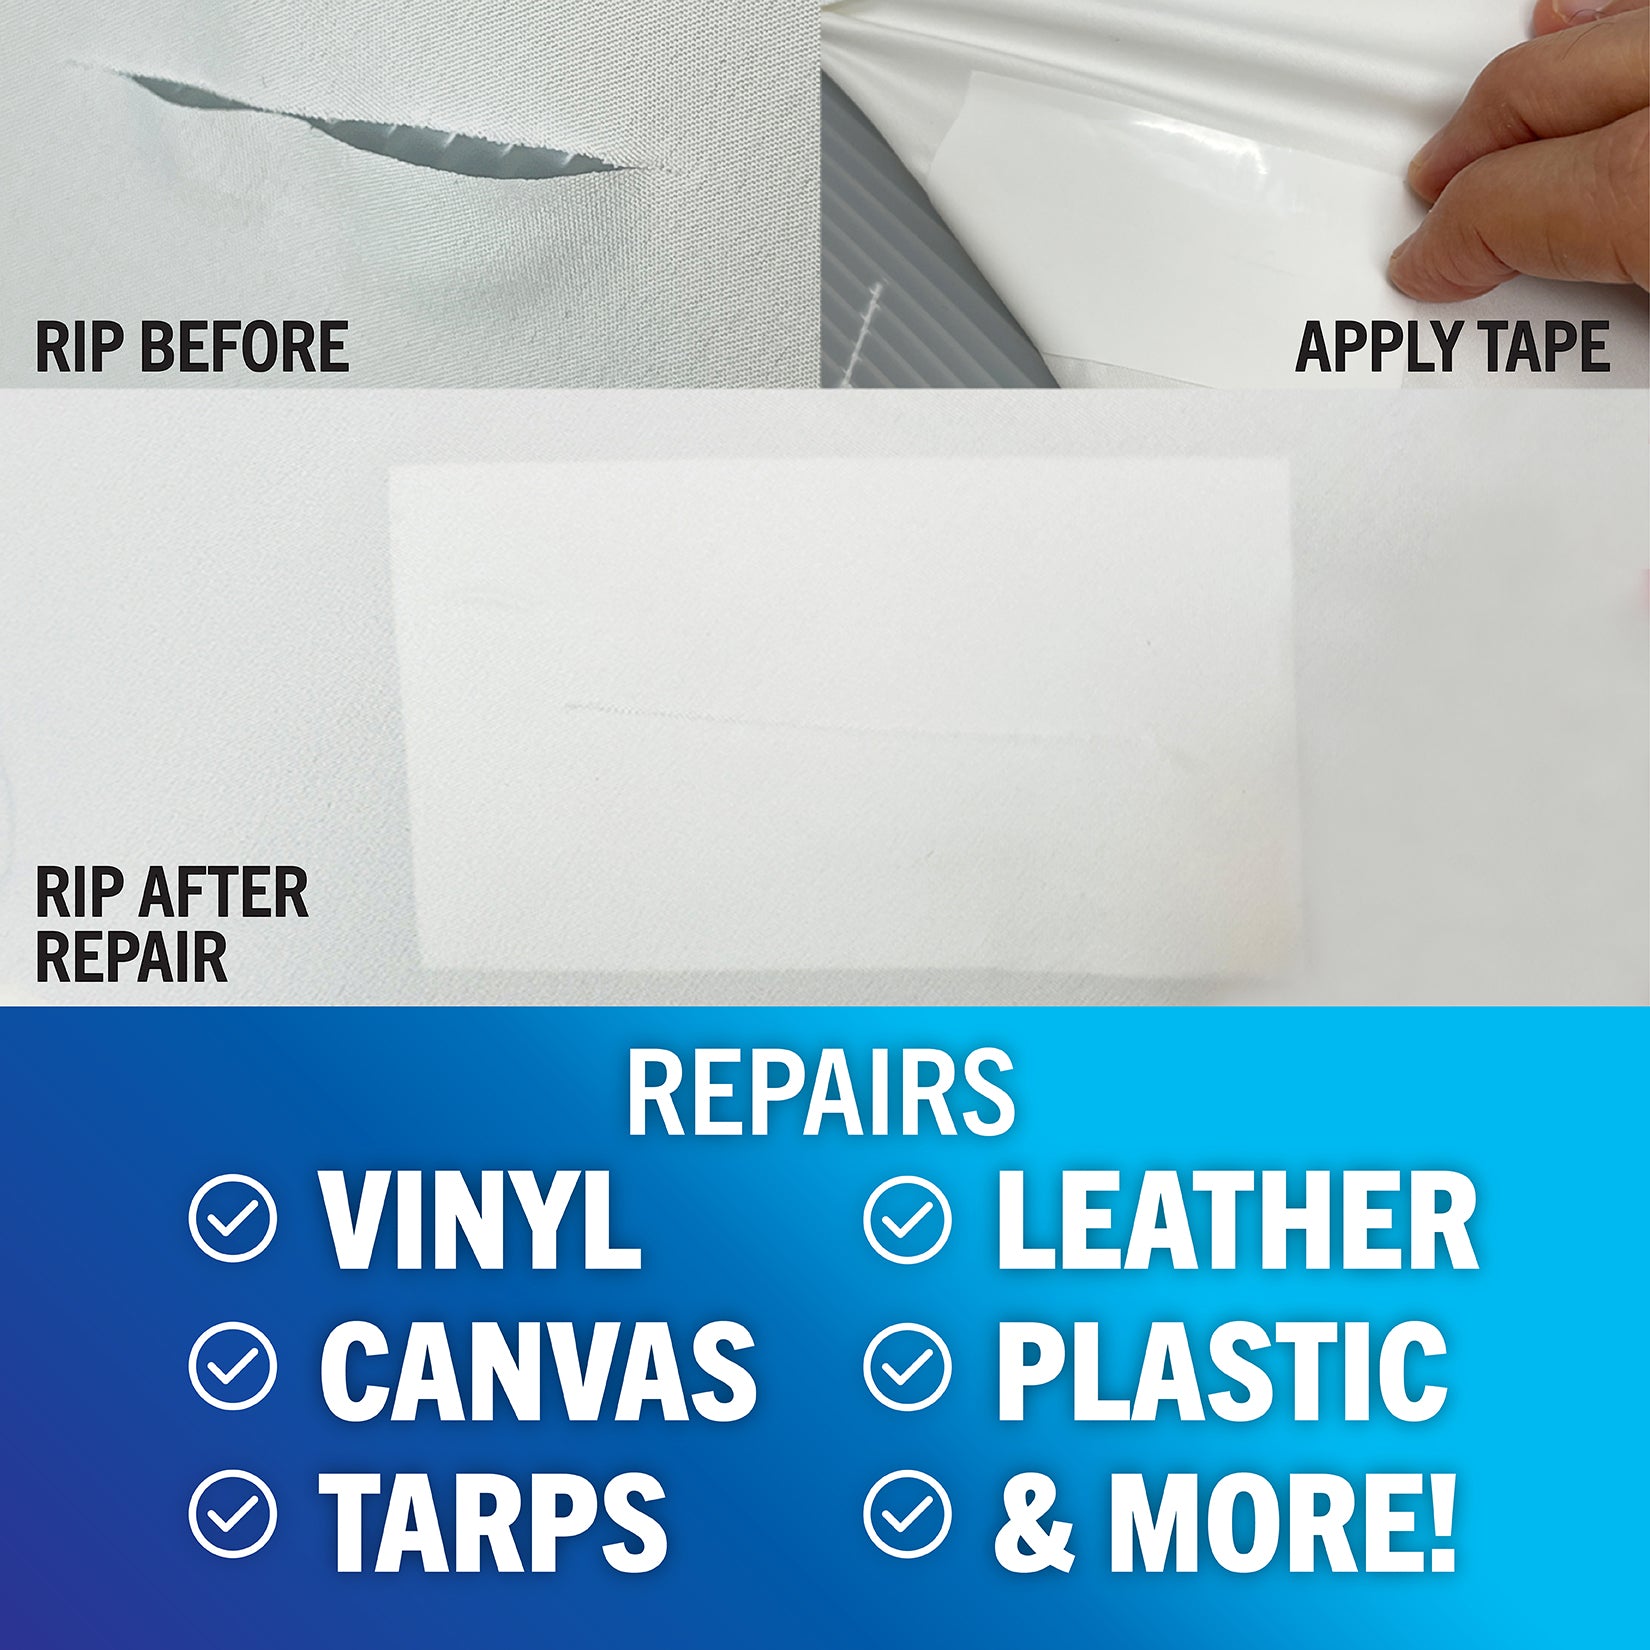 Heavy Duty Fabric Repair Tape: Canvas, Boat Covers, Awnings